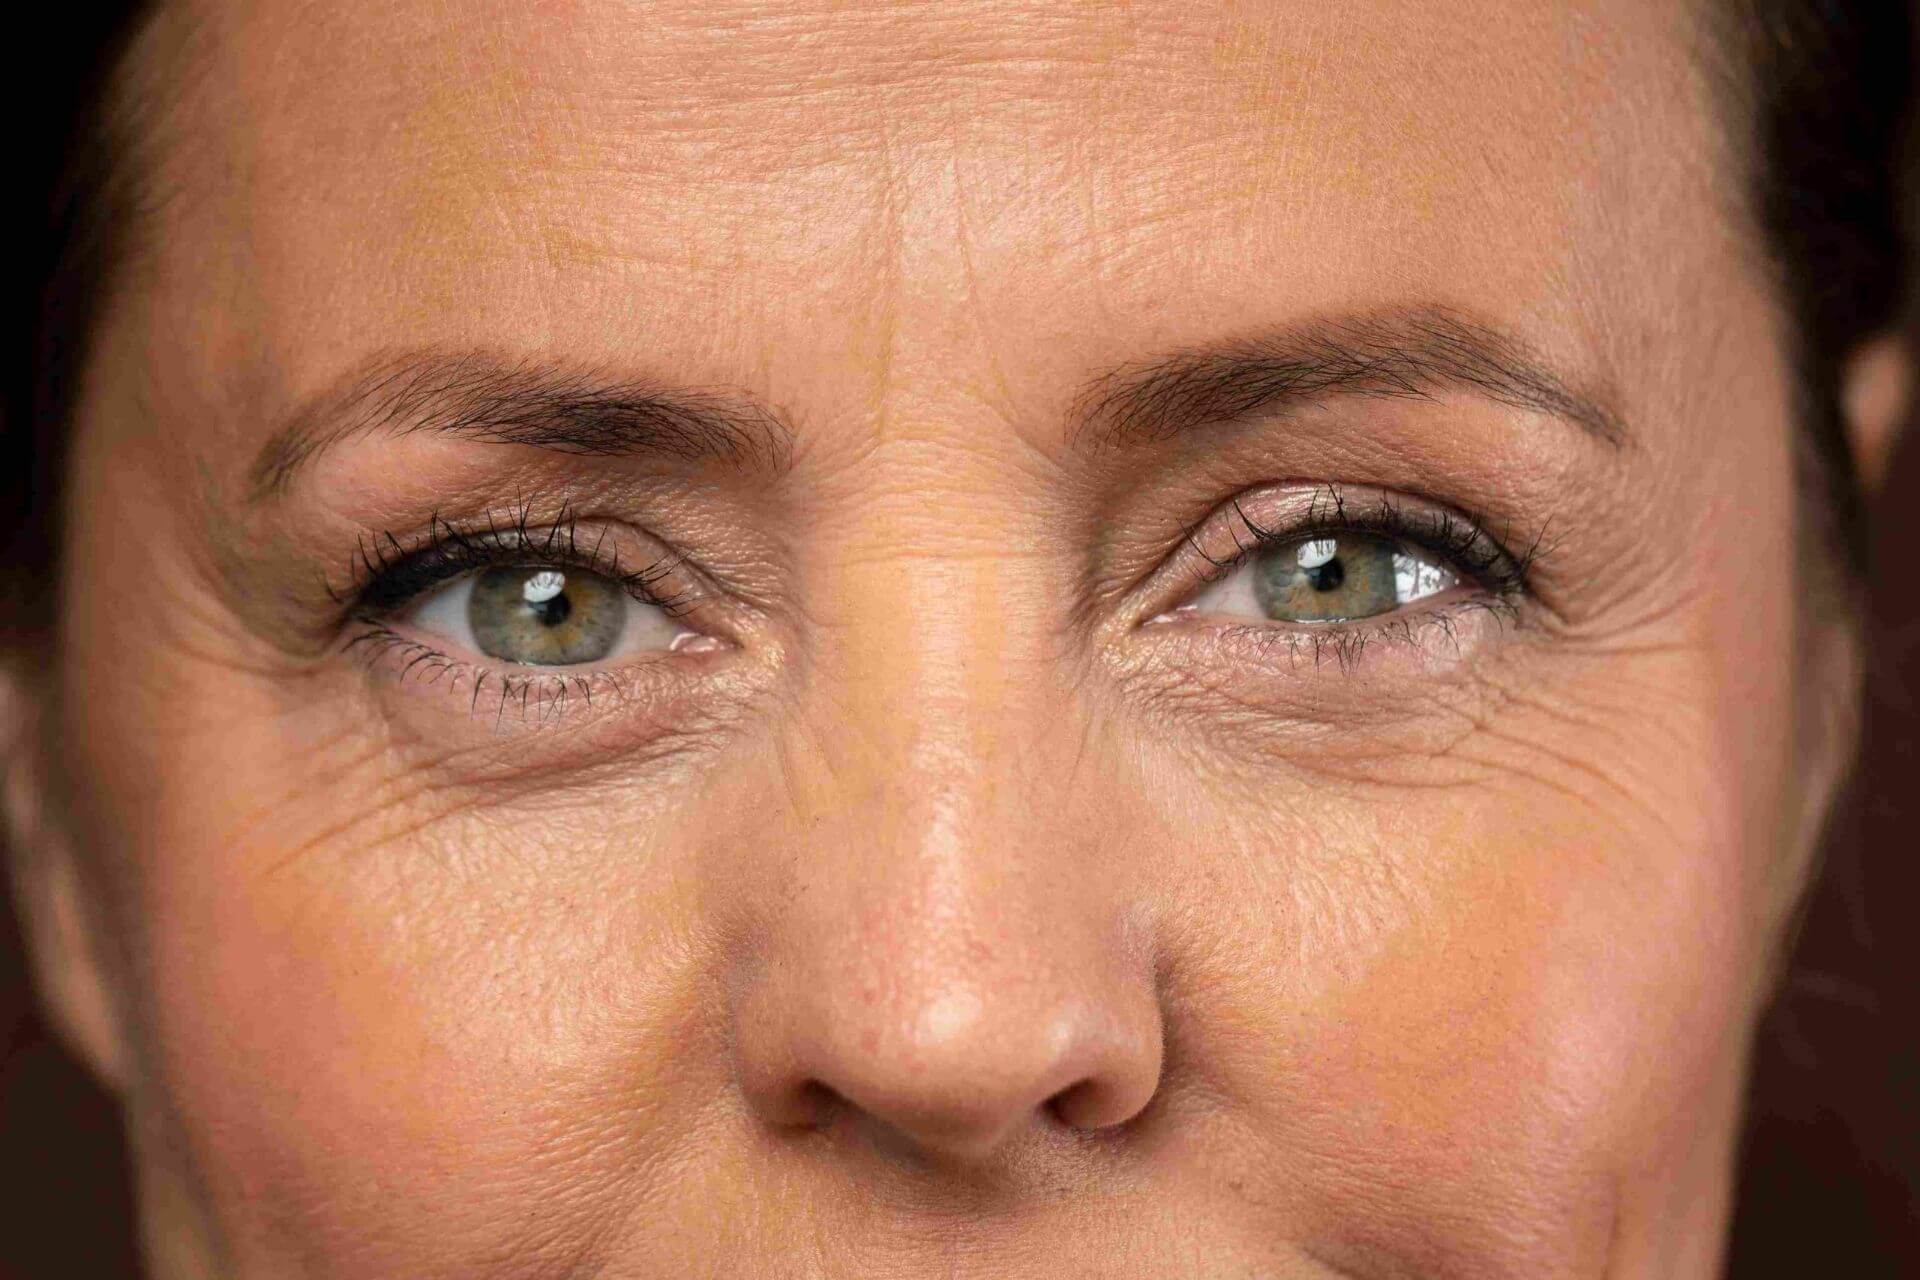 Eyelid Surgery Before and After: What to Expect